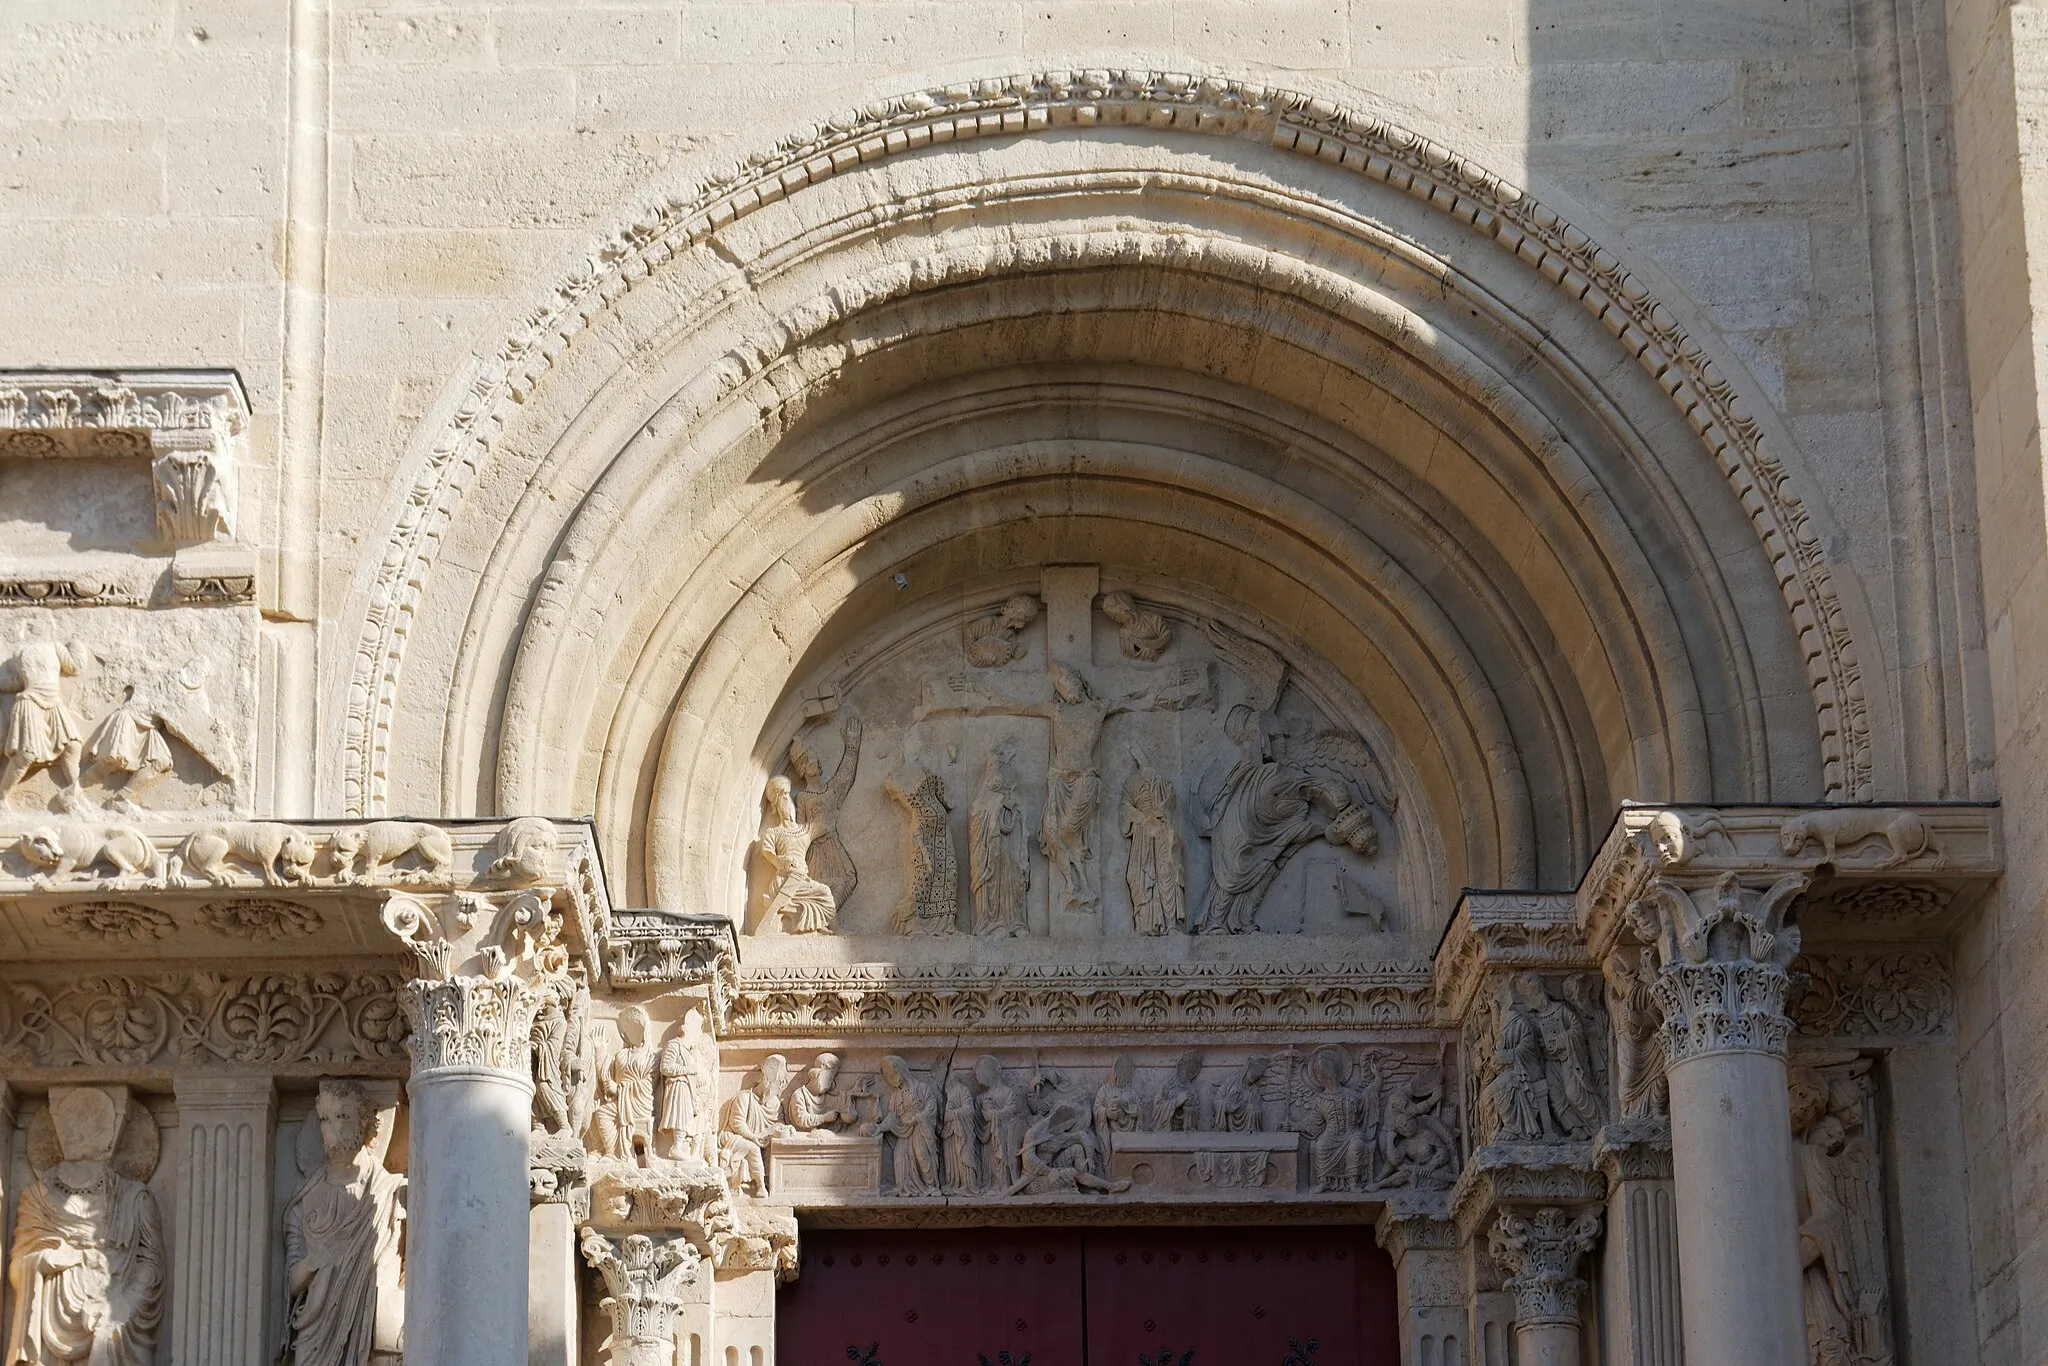 Photo showing: Tympanum: Christ on the cross surrounded by holy women. The synagogue ruined by divine anger represents the advent of Christianity. Lintel Frieze: Jesus and Mary Magdalene, women buying perfume to wash the crucified, the holy women at the tomb guarded by sleeping soldiers, apparition (to Mary Magdalene) of the risen Jesus.